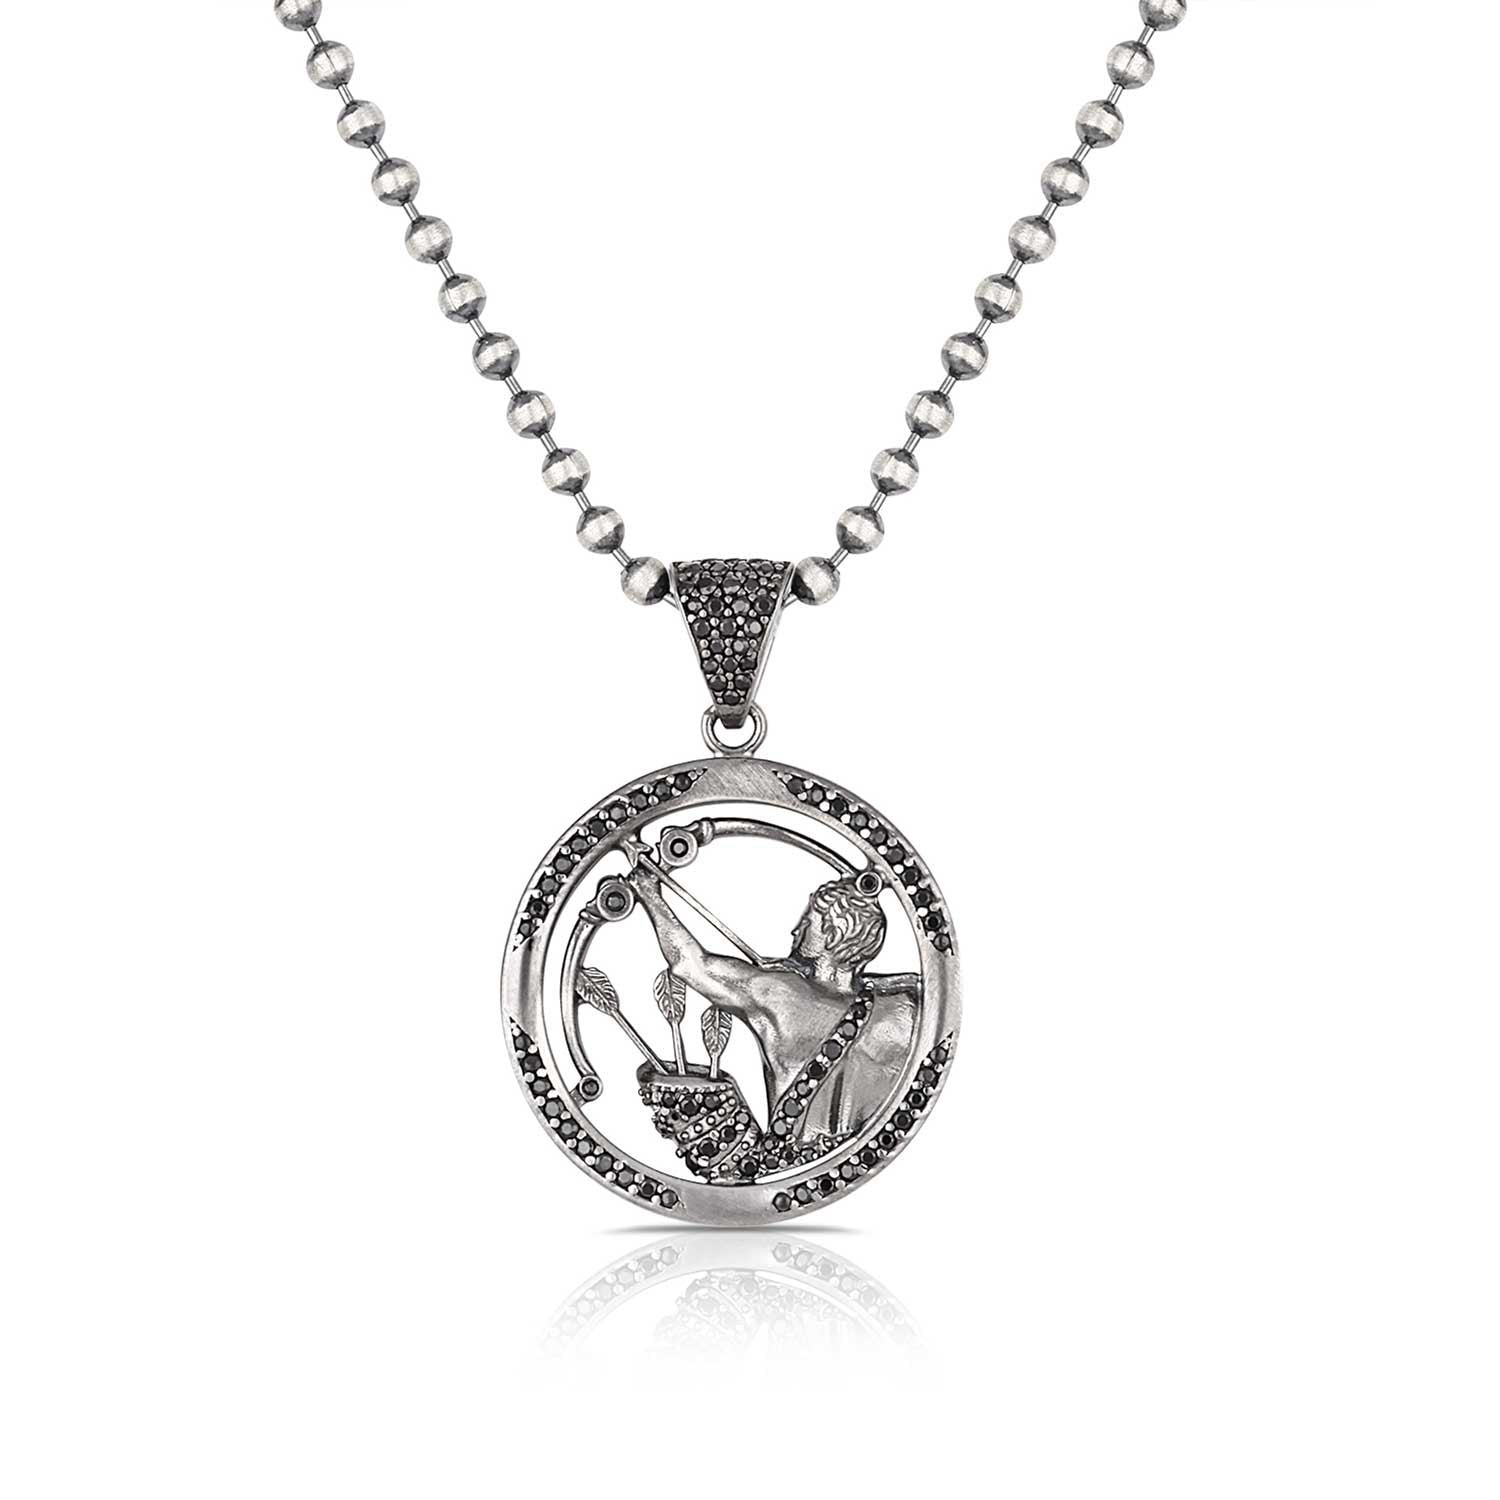 RARE PRINCE by CARAT SUTRA | Unique Sagittarius Zodiac Designed Pendant Studded with Black Zircons | Unisex 925 Sterling Silver Oxidized Pendant | Men's Jewelry | With Certificate of Authenticity and 925 Hallmark - caratsutra